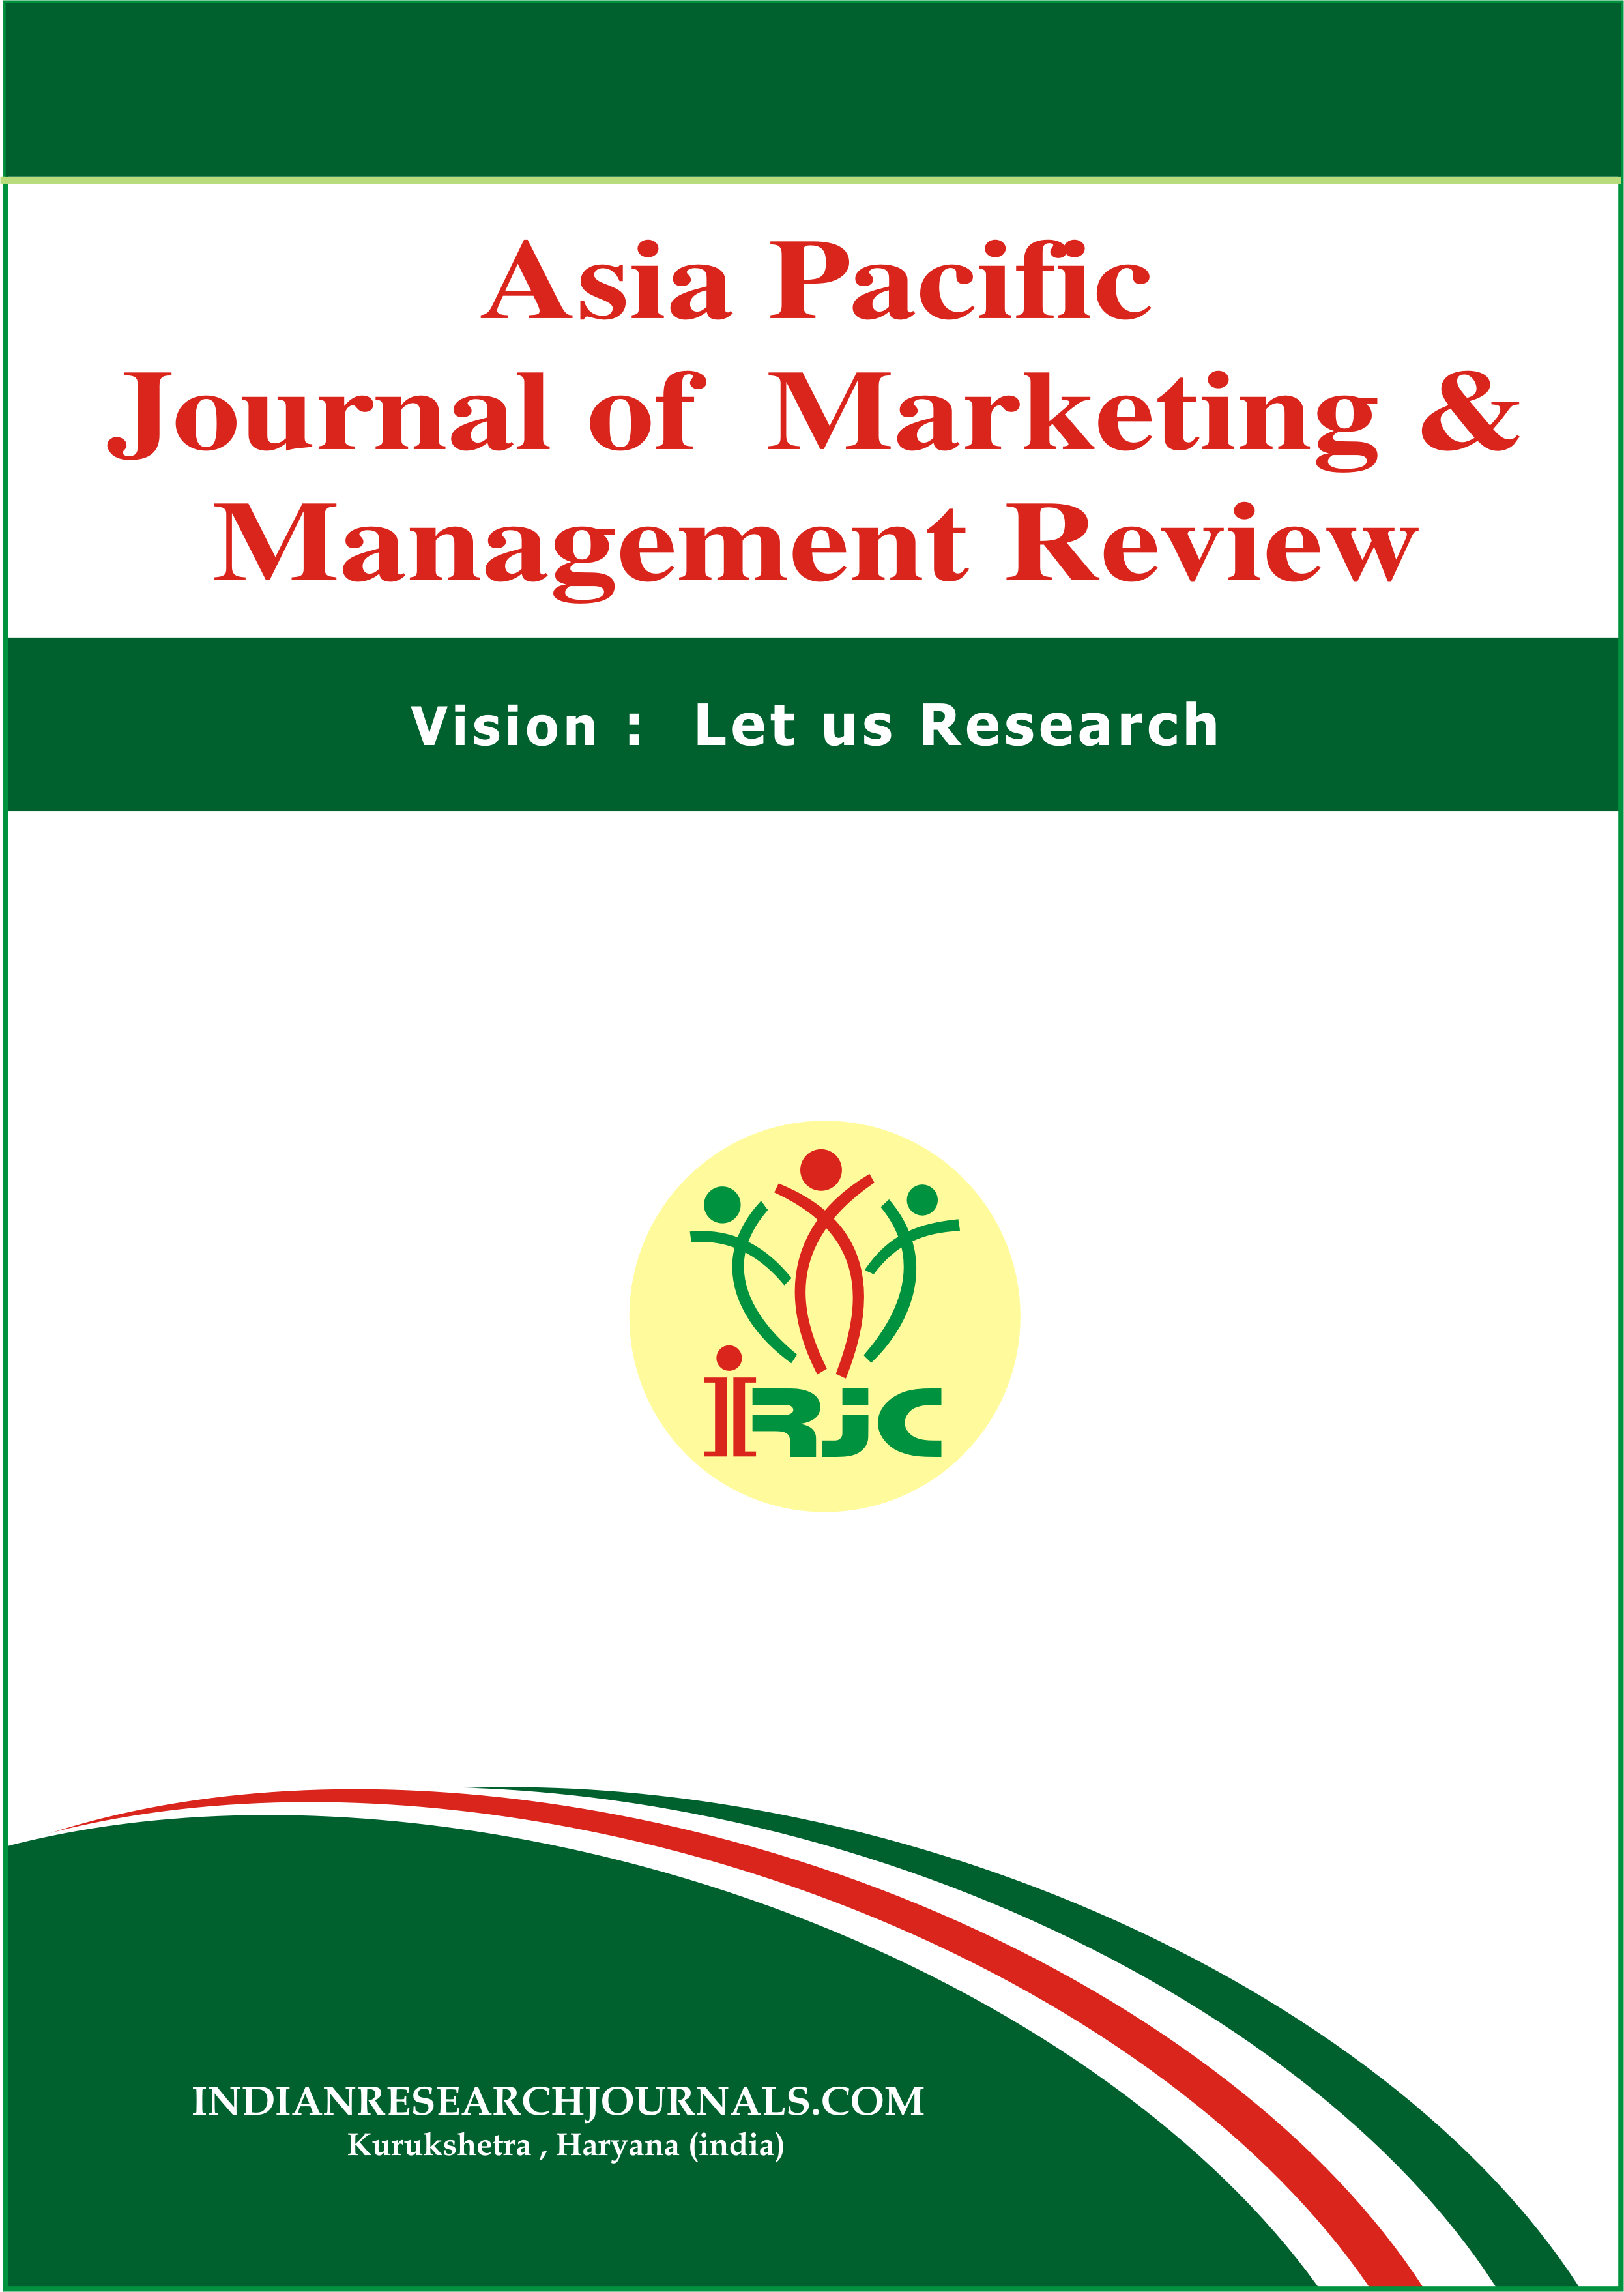 					View Vol. 11 No. 06 (2022): ASIA PACIFIC JOURNAL OF MARKETING & MANAGEMENT REVIEW
				